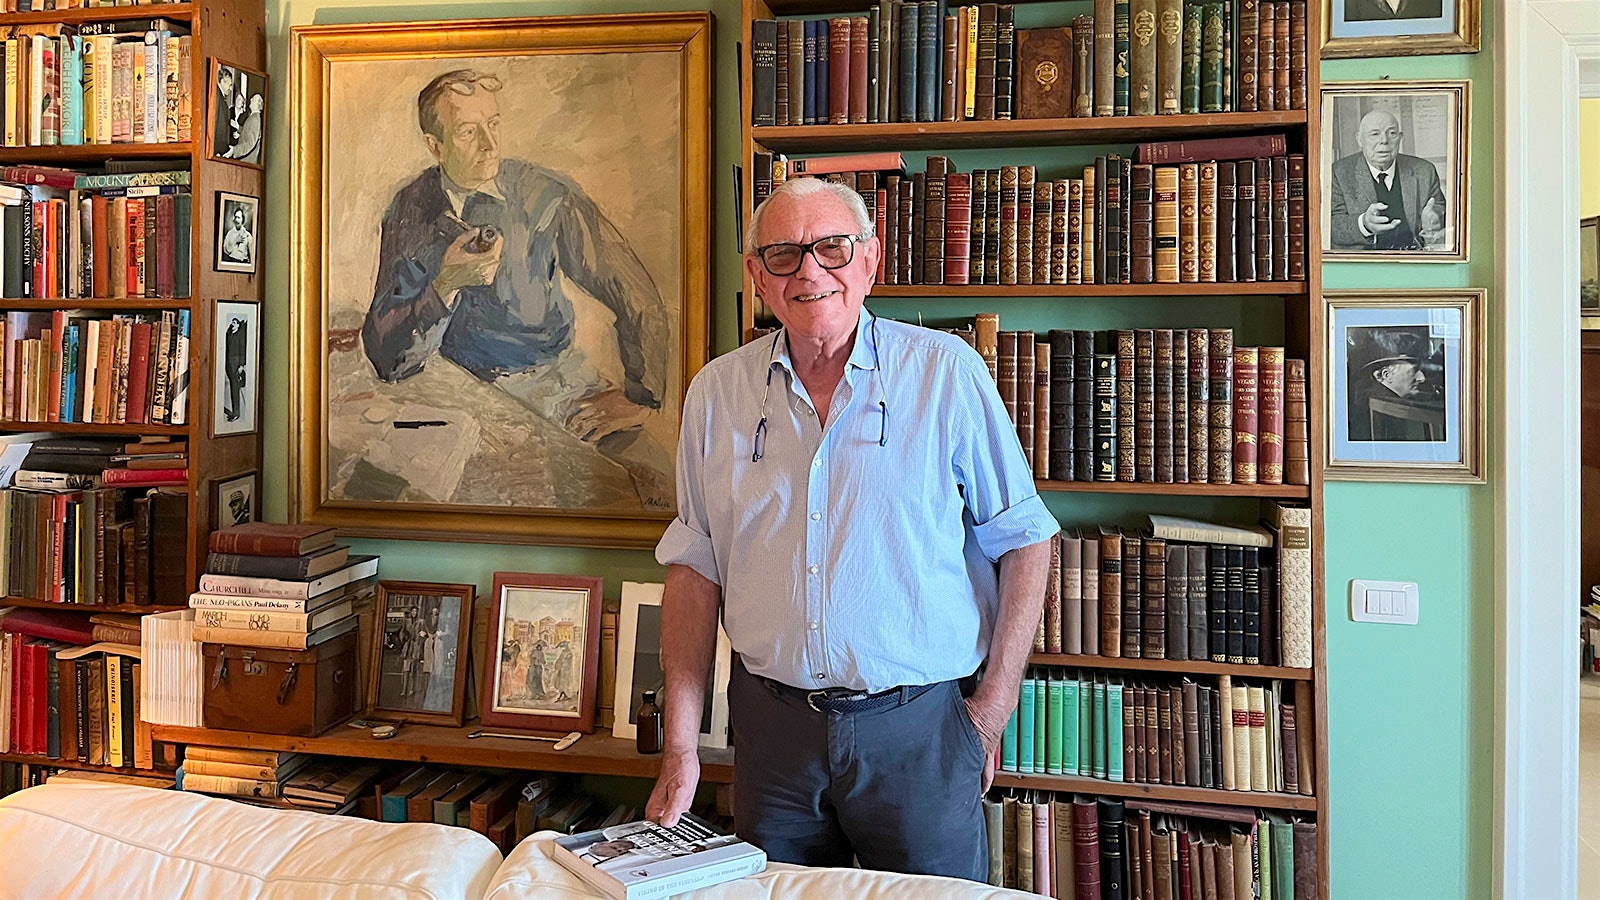  Peter Vinding-Diers stands in his library in front of shelves of books and a portrait of his father